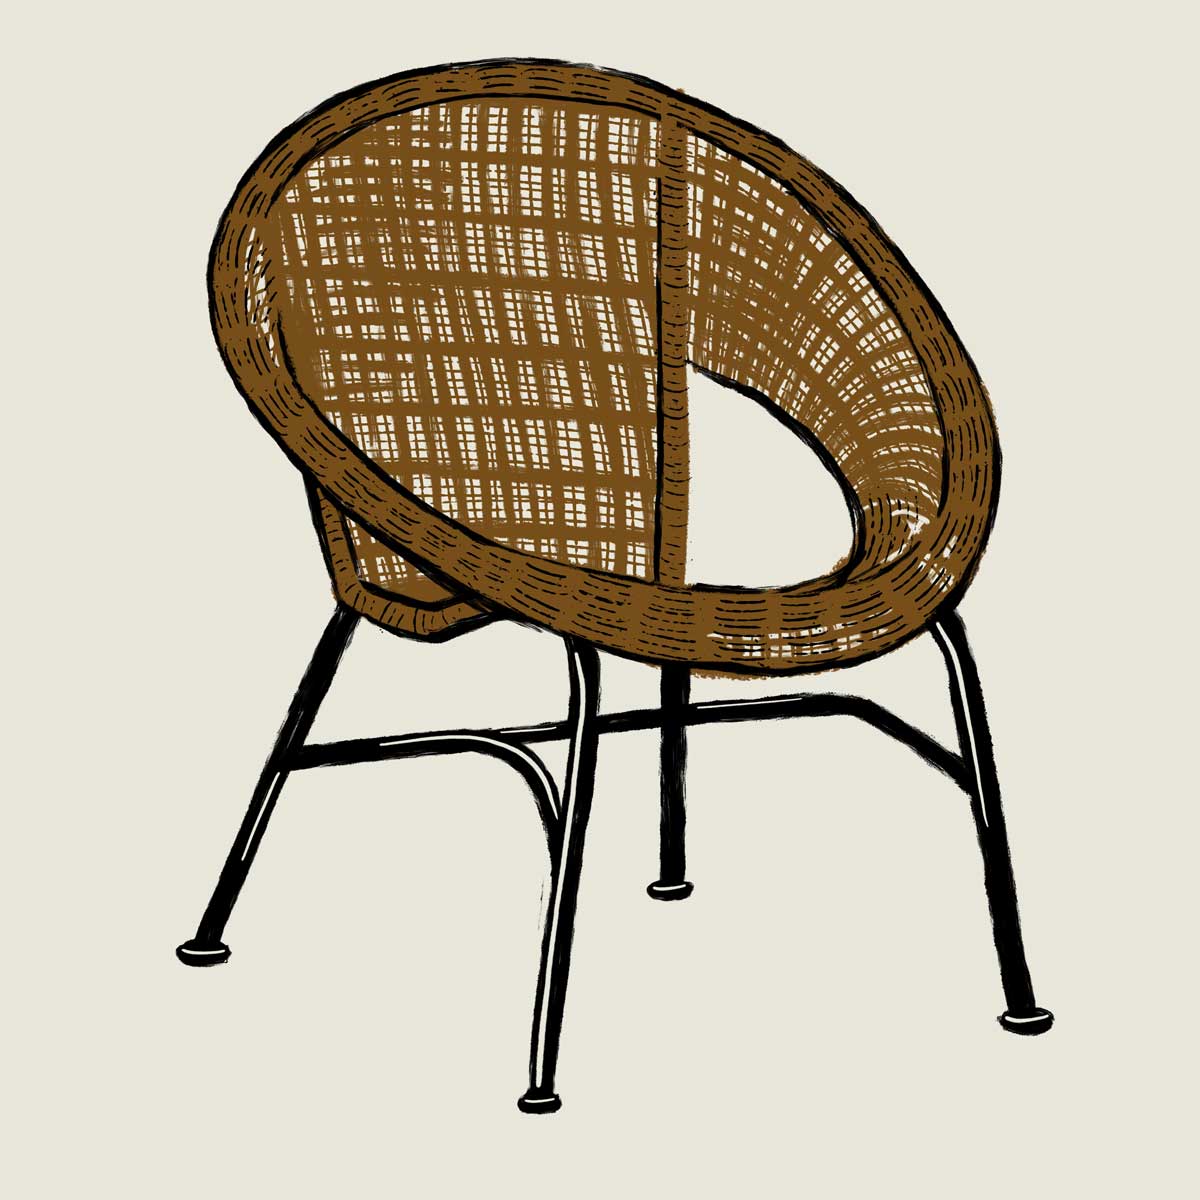 An illustration of a rattan chair using textured brushes that give it the appearance of a lithograph print